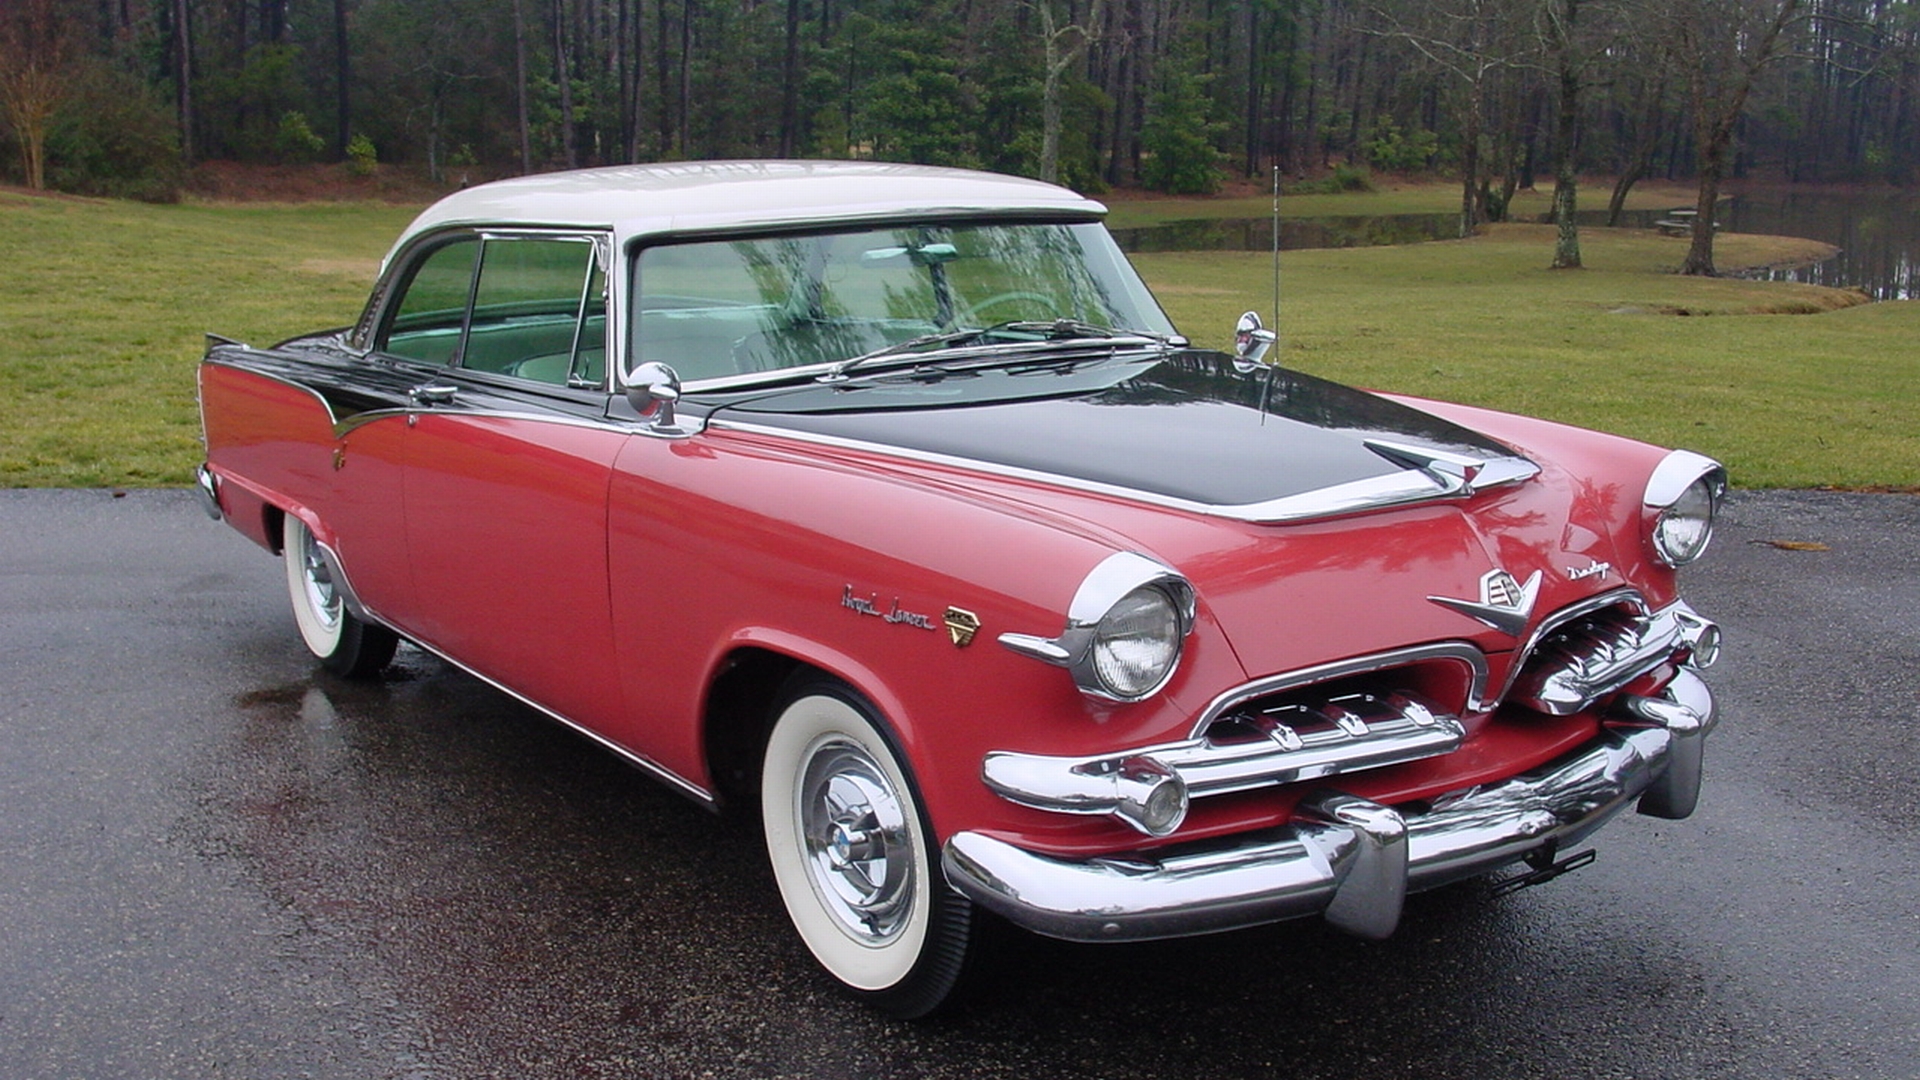 1955 Dodge Royal Lancer Coupe parked elegantly in a picturesque setting